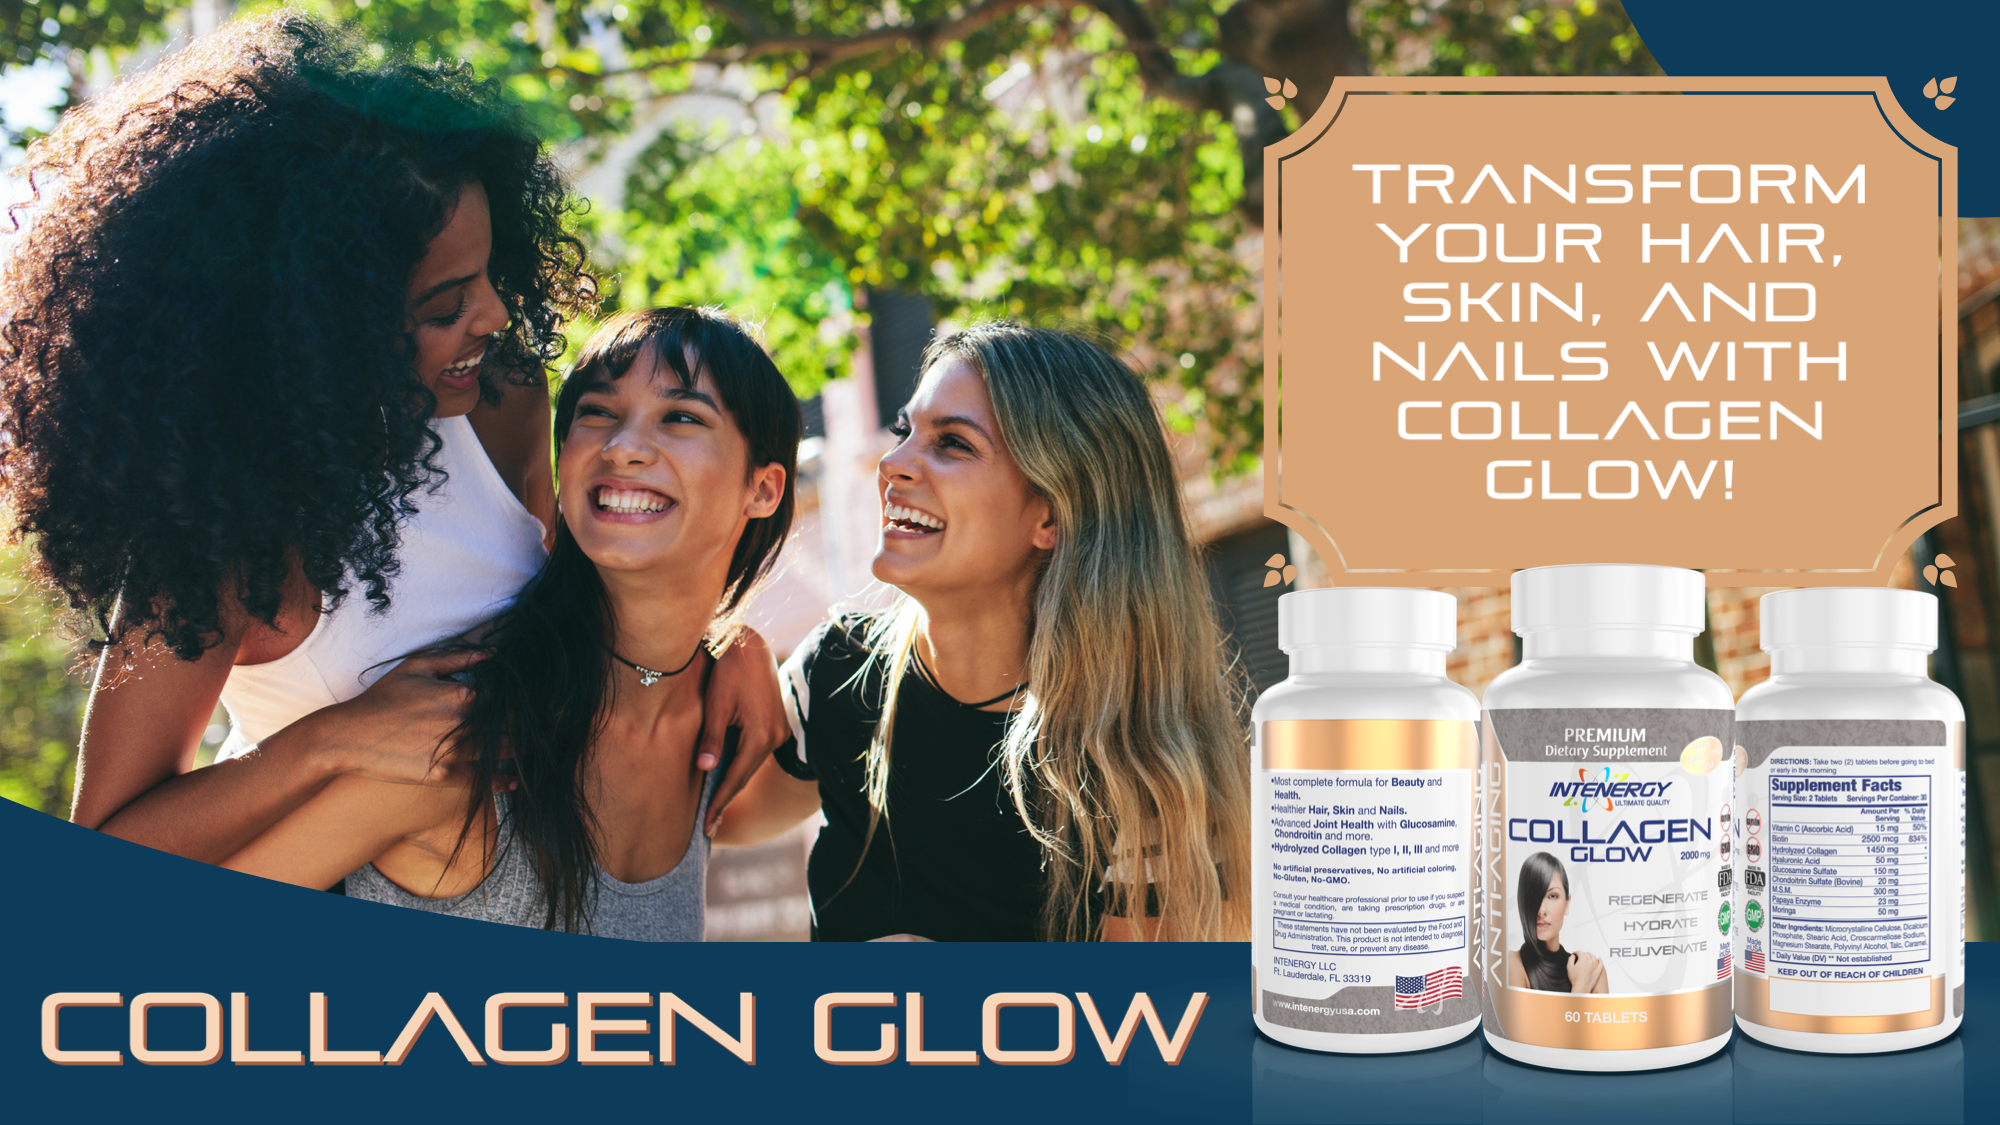 Intenergy Collagen Glow for Healthier Hair, Skin, and Nails